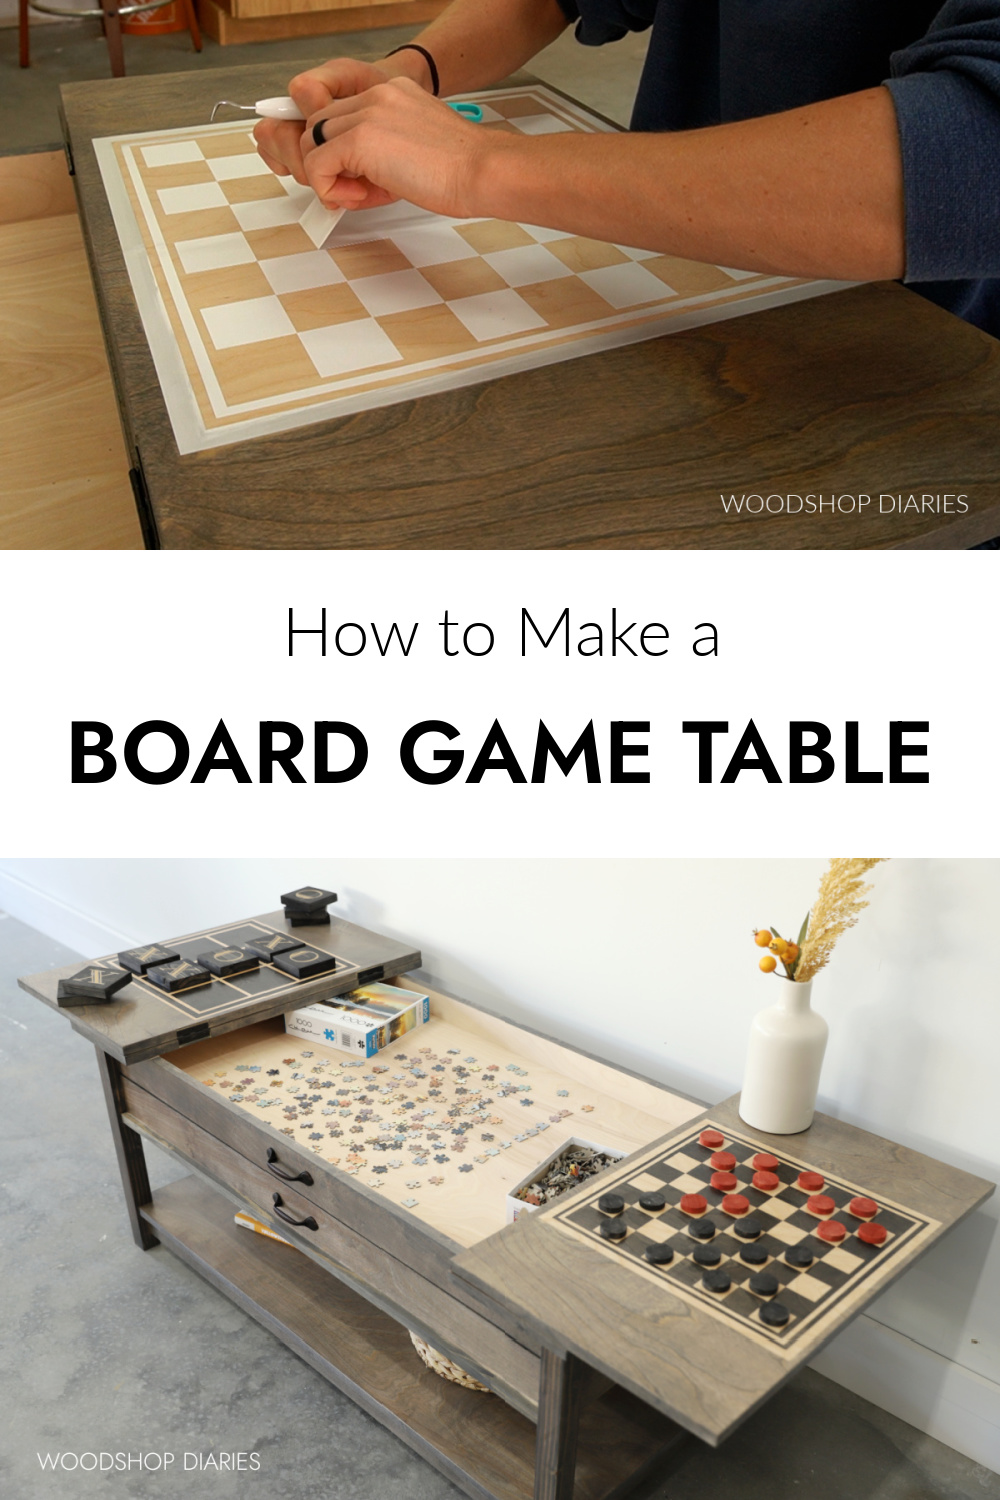 Board game table pinterest collage image showing stencil at top and completed table at bottom with text "how to make a board game table"